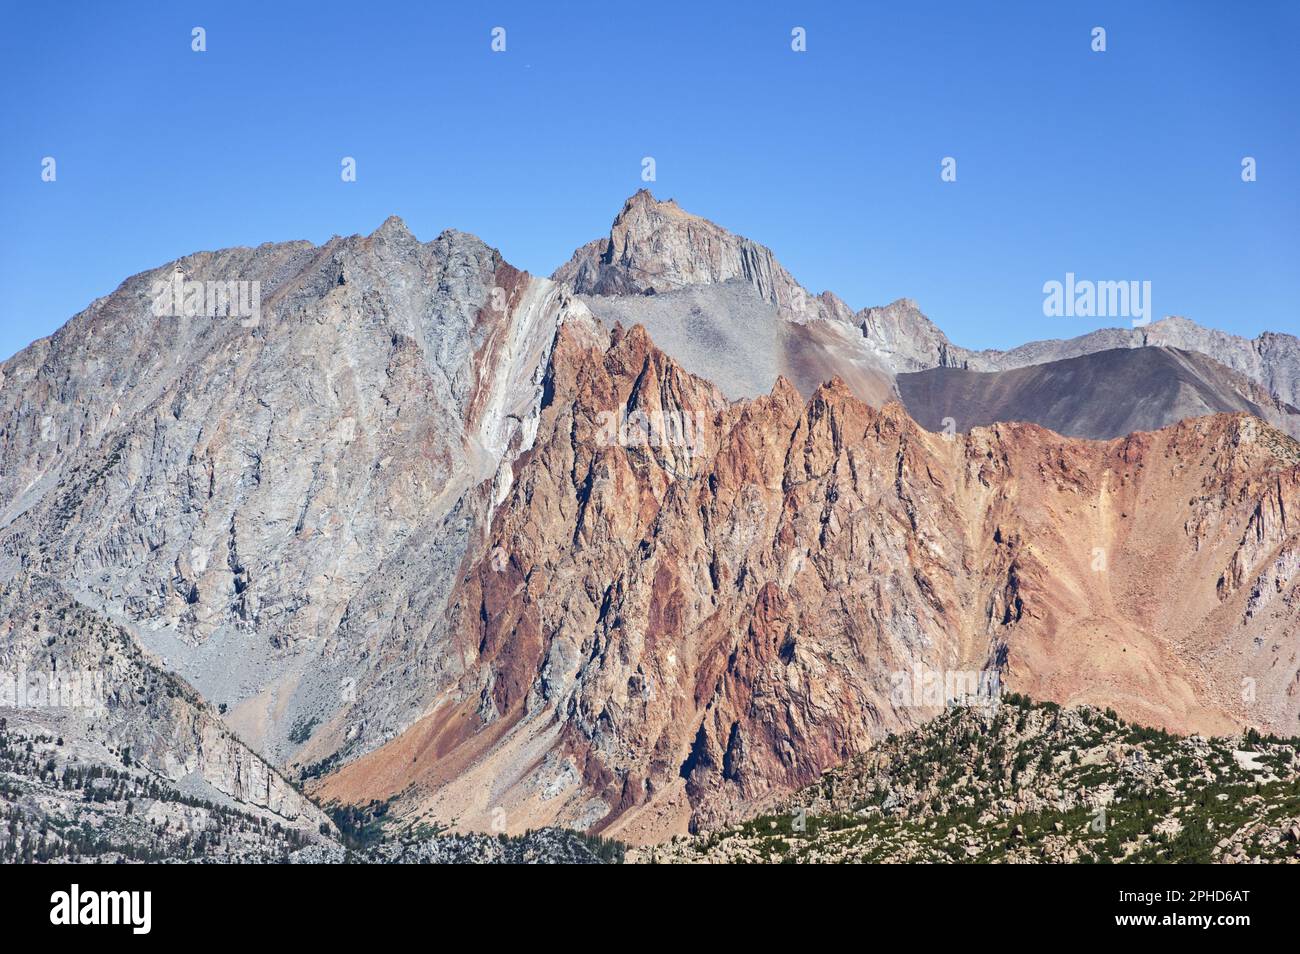 Mount Emerson Mount Humphreys and Piute Crags in the Sierra Nevada Mountains near Bishop California Stock Photo